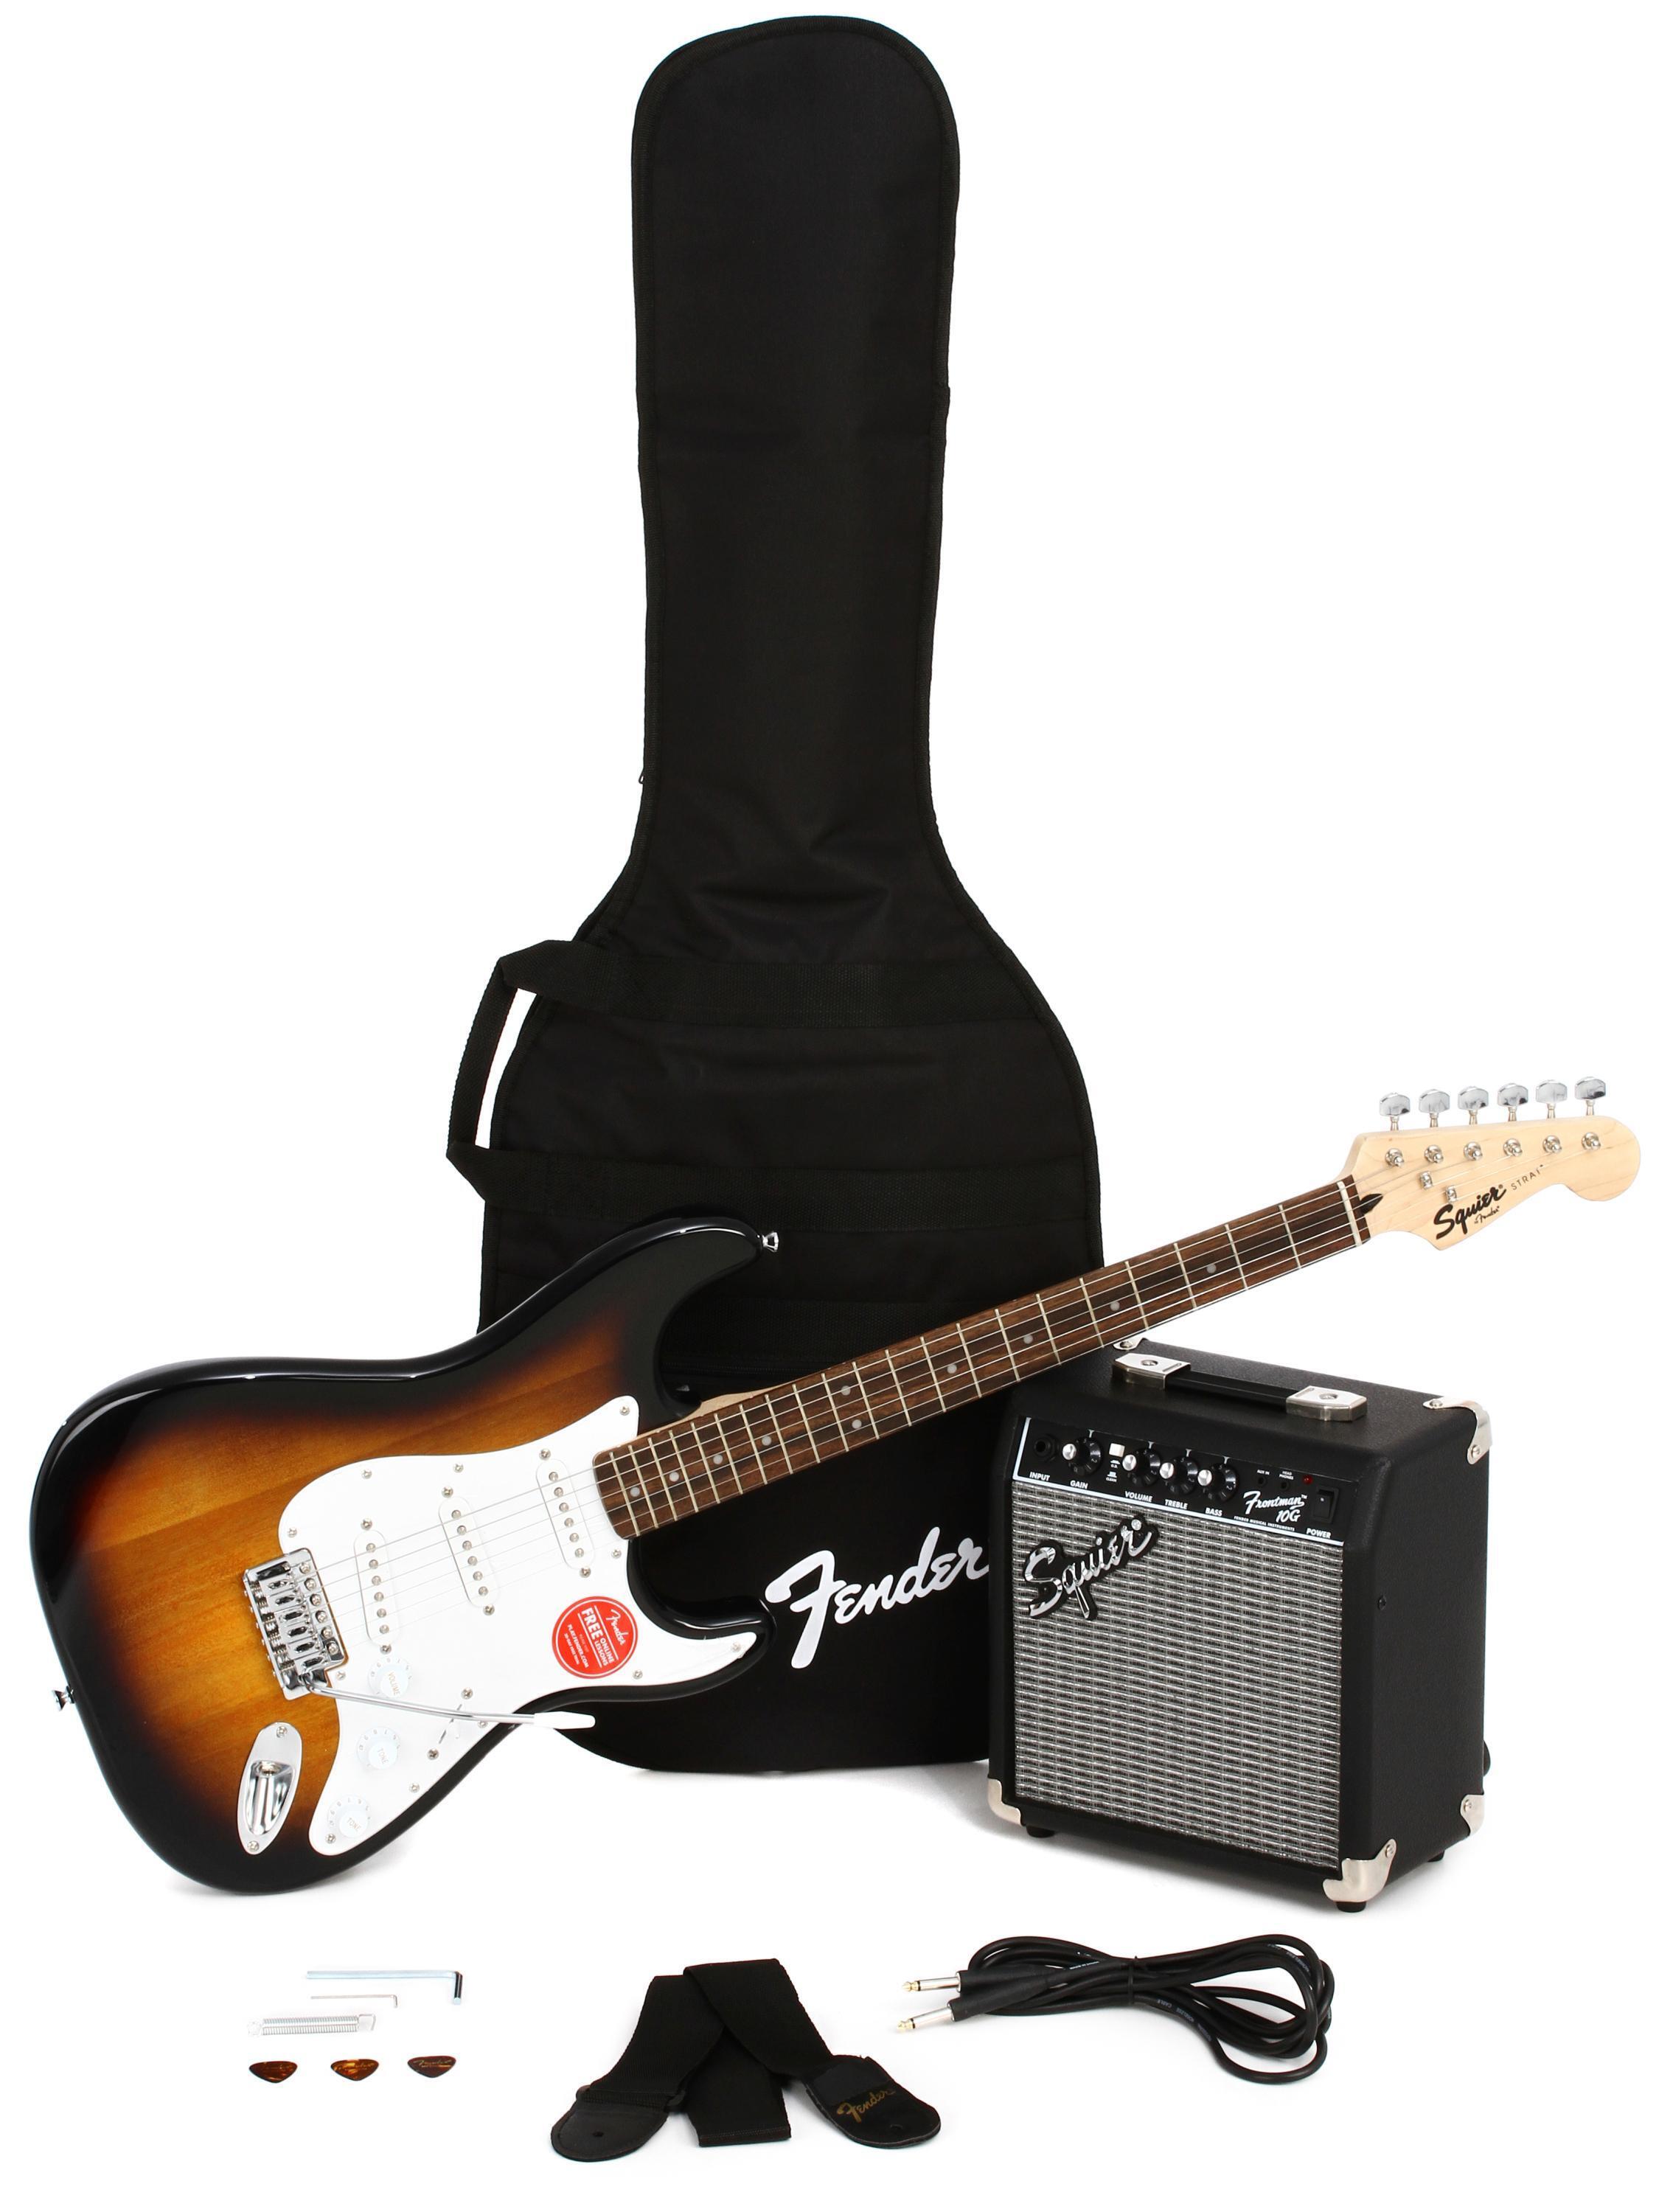 Squier Stratocaster Pack - Brown Sunburst | Sweetwater